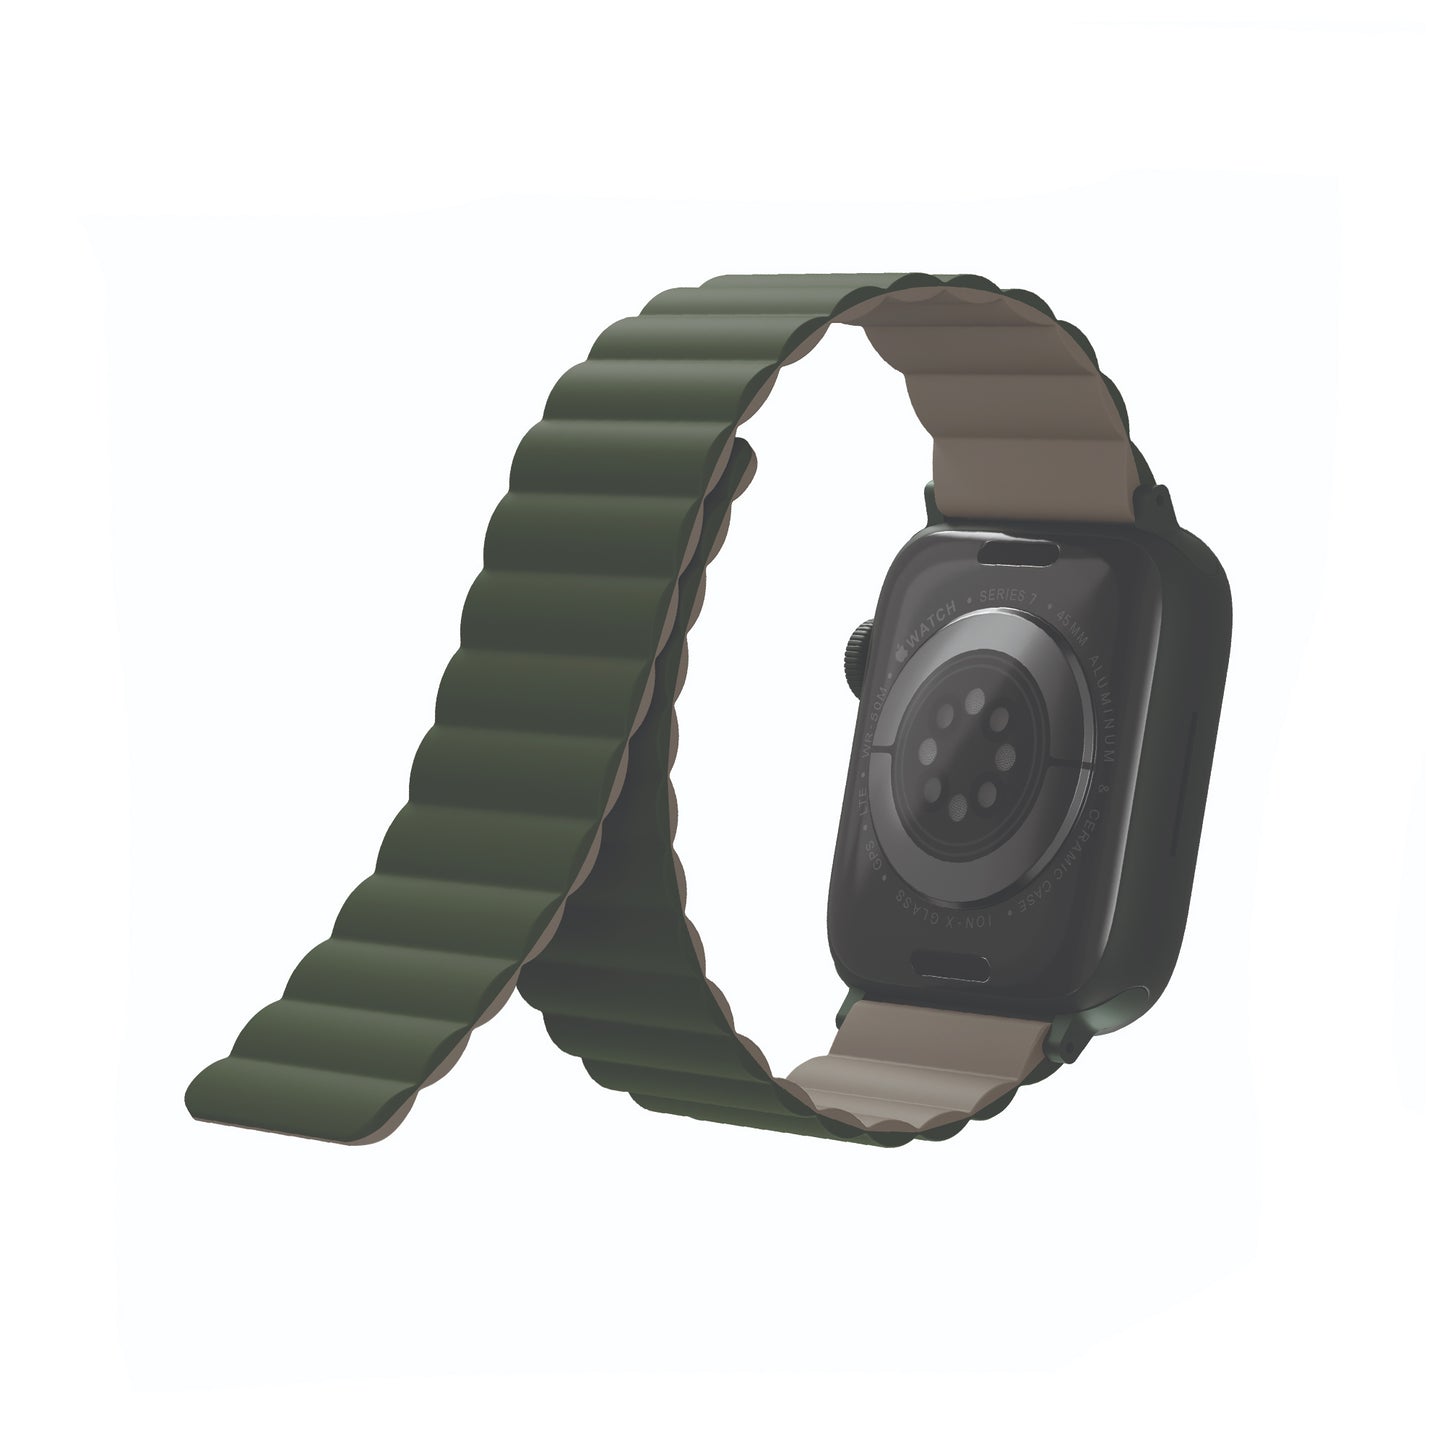 UNIQ Revix Magnetic Silicone Strap for Apple Watch Series 7 - SE - 6 - 5 - 4 - 3 - 2 - 1 ( 45mm - 44mm - 42mm ) - Pine ( Green - Taupe ) (Barcode: 8886463679166 )